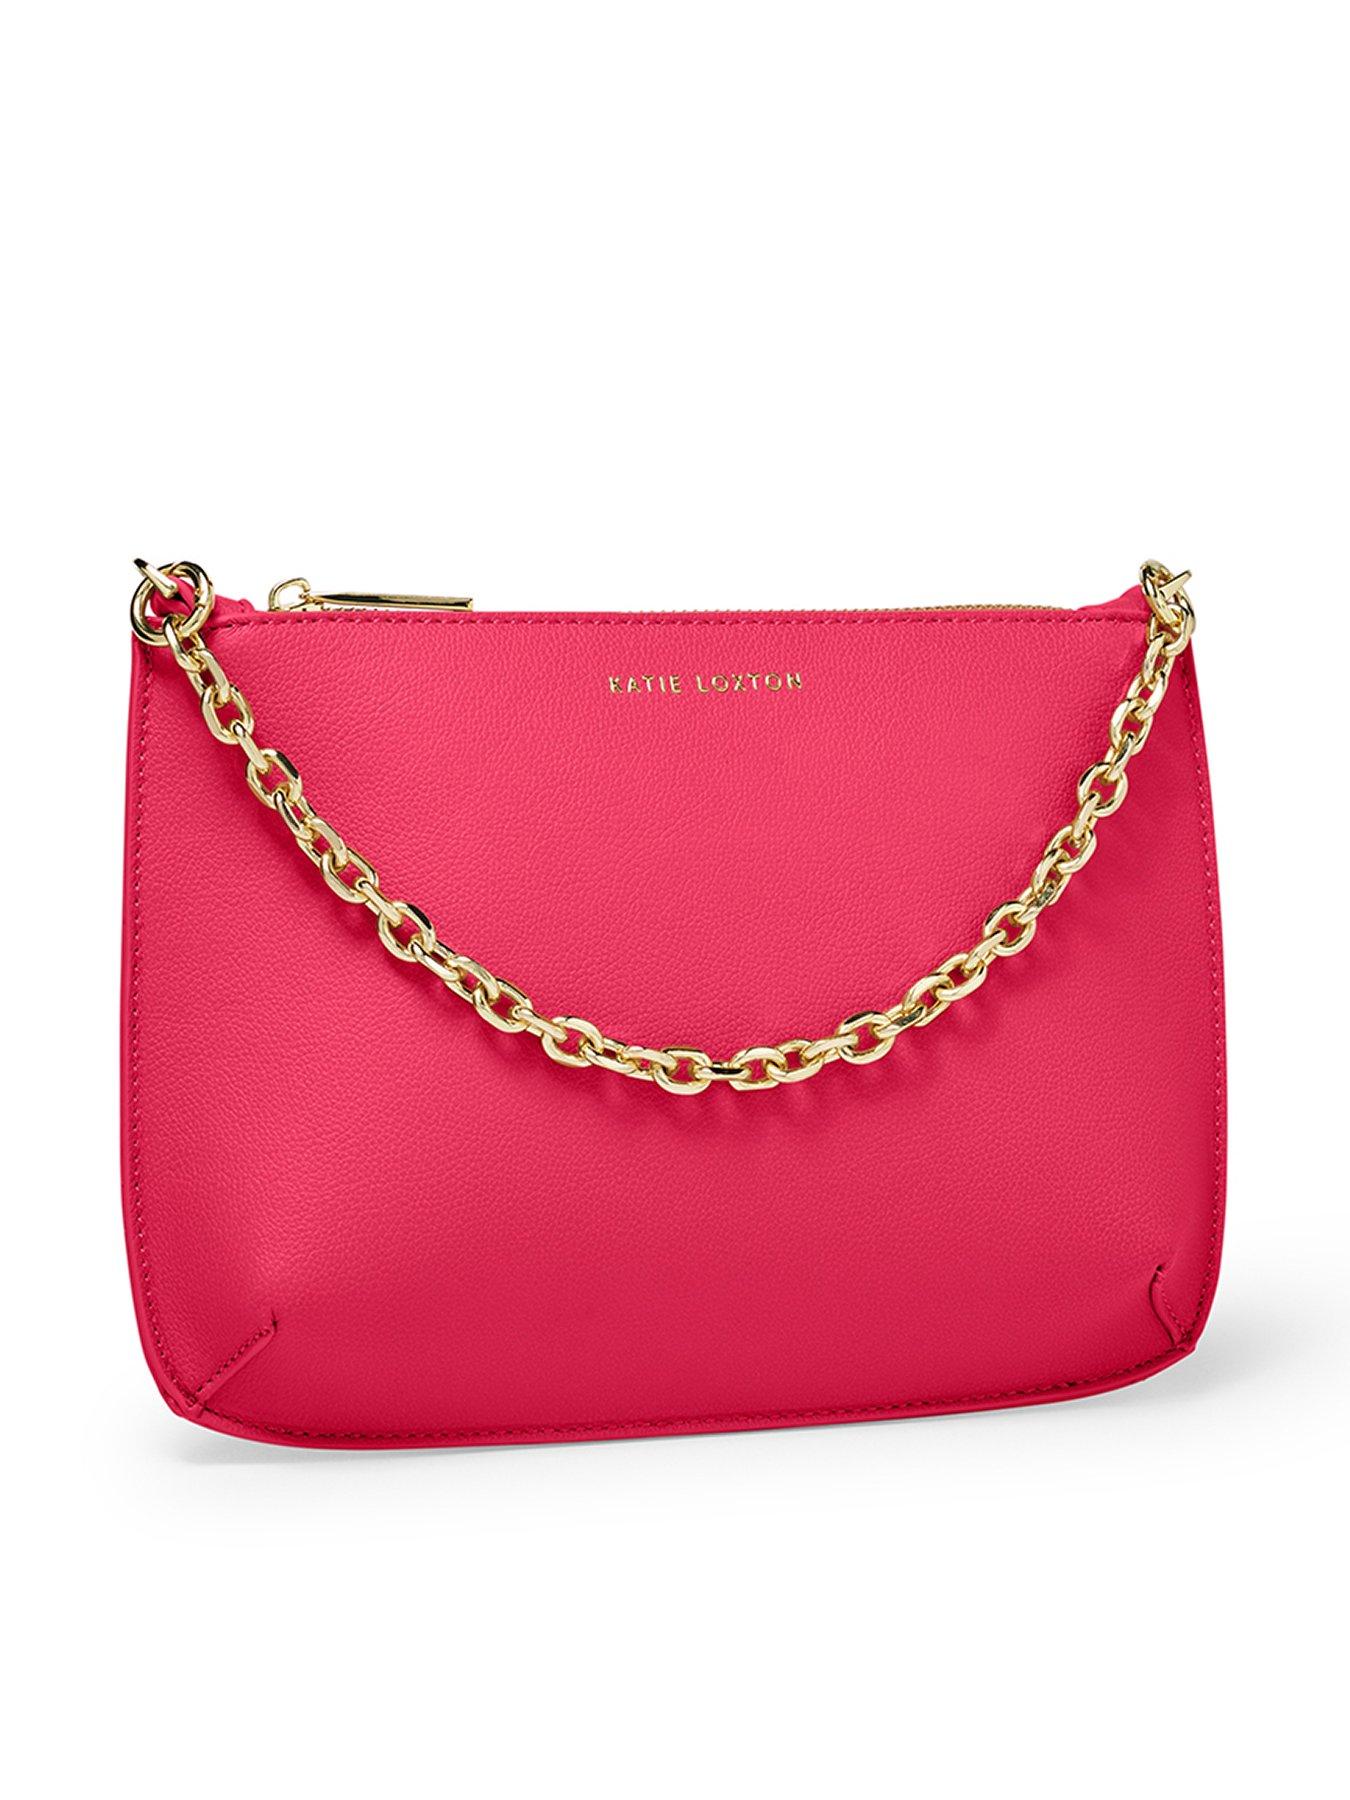 Ted Baker Crosshatch Cross Body Bag With Rose Gold Chain, $156